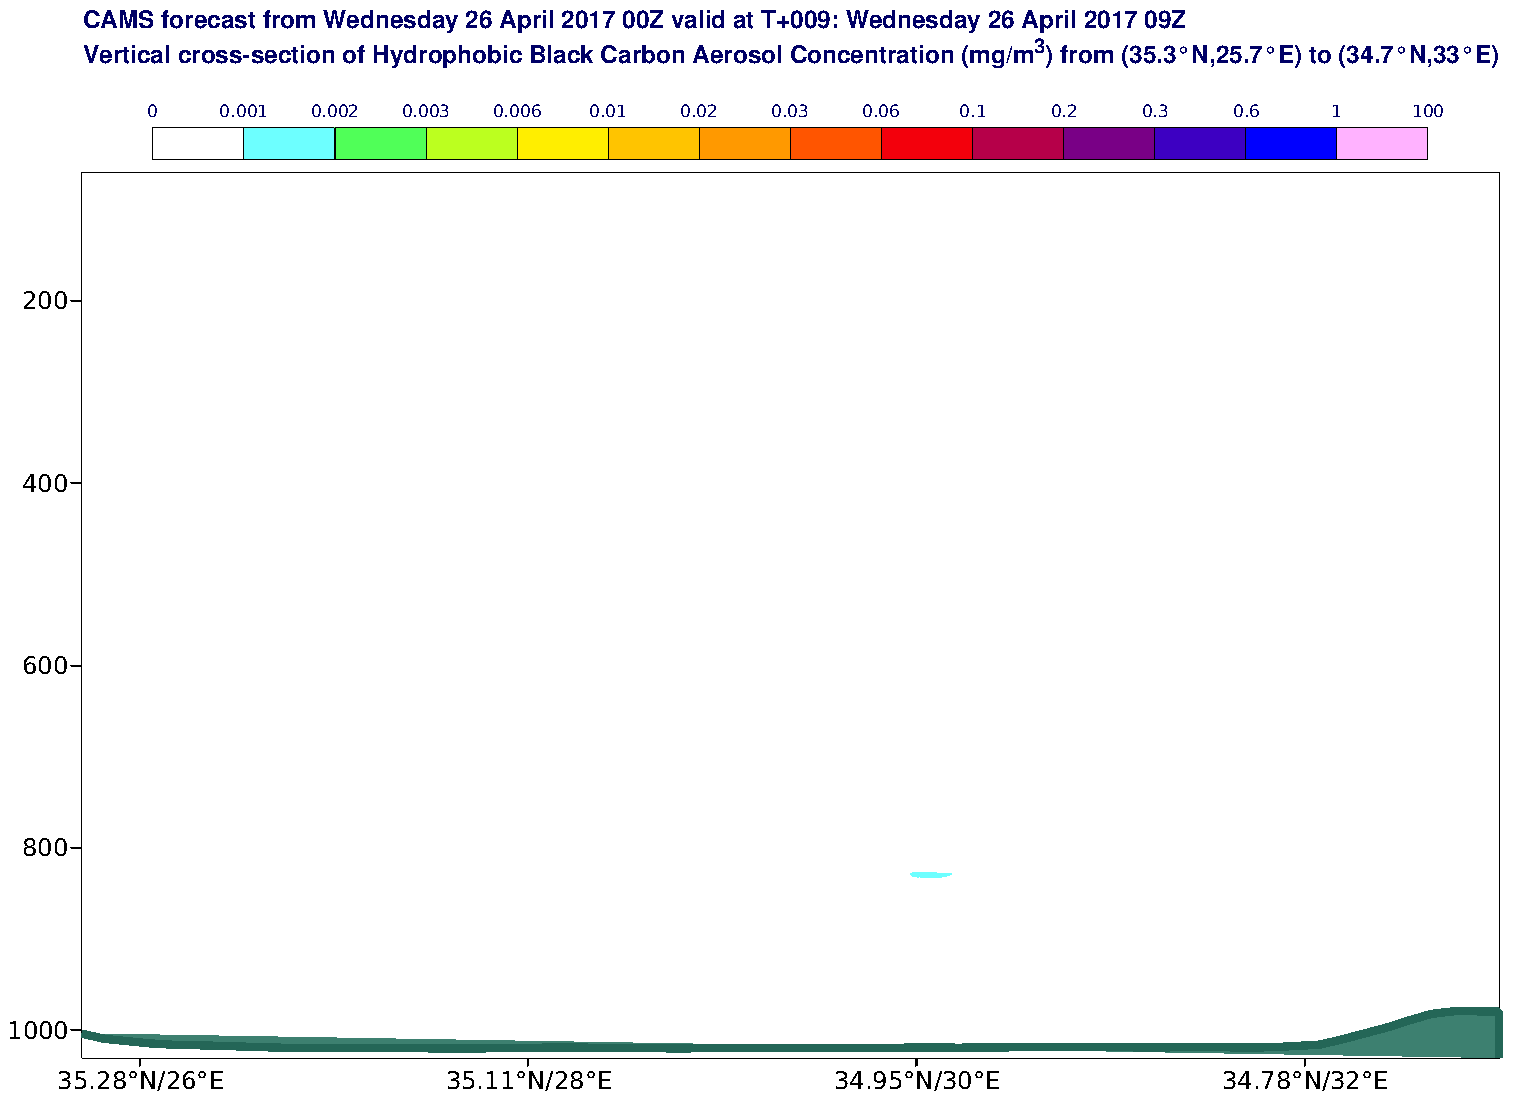 Vertical cross-section of Hydrophobic Black Carbon Aerosol Concentration (mg/m3) valid at T9 - 2017-04-26 09:00